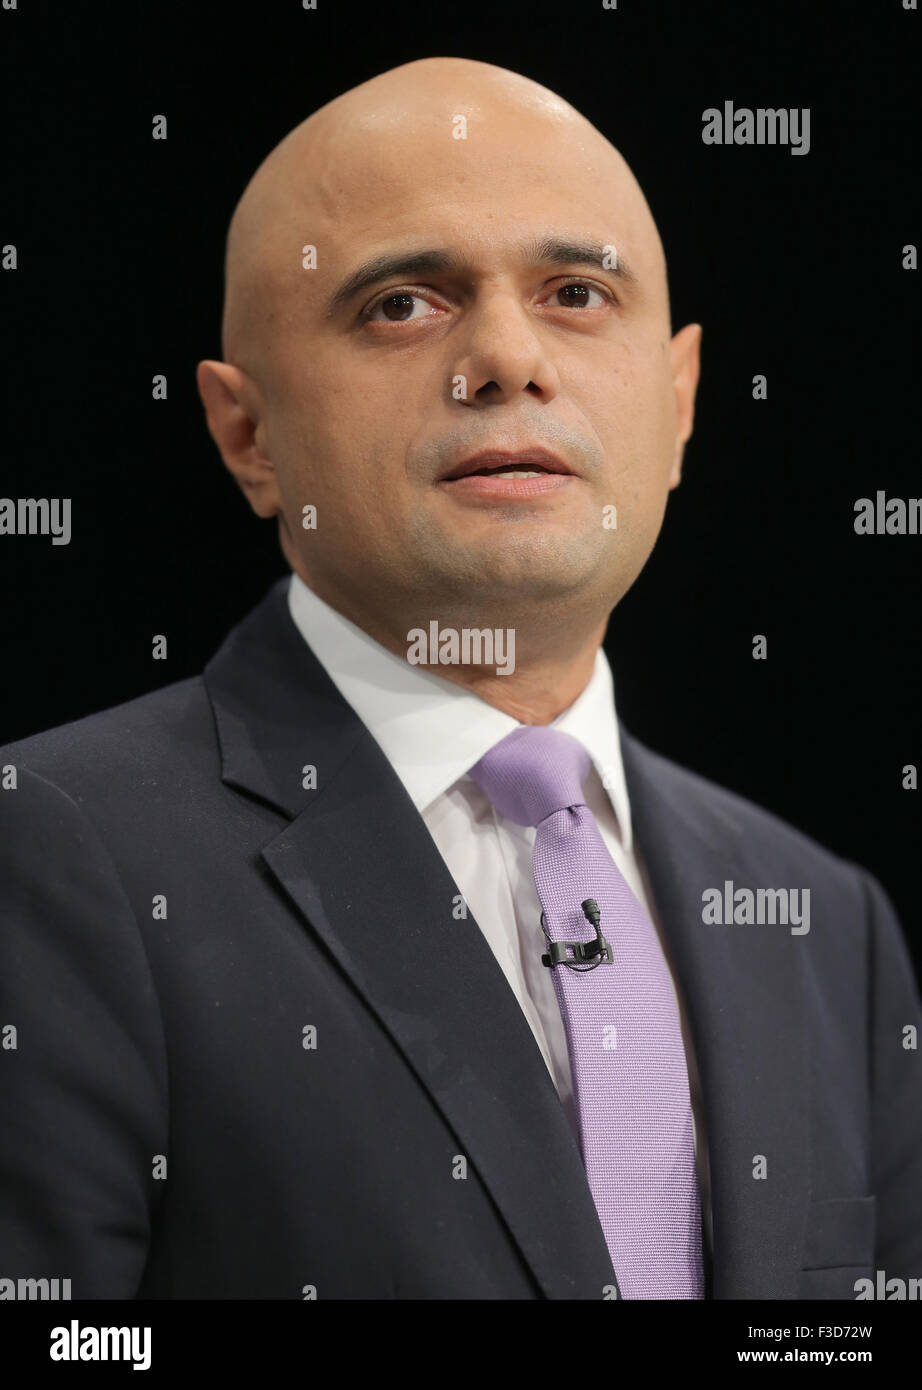 Sajid Javid Mp Secretary Of State For Business, Innovation And Skills Conservative Party Conference 2015 Manchester Central, Manchester, England 05 October 2015 Addresses The Conservative Party Conference 2015 At Manchester Central, Manchester Credit:  Allstar Picture Library/Alamy Live News Stock Photo